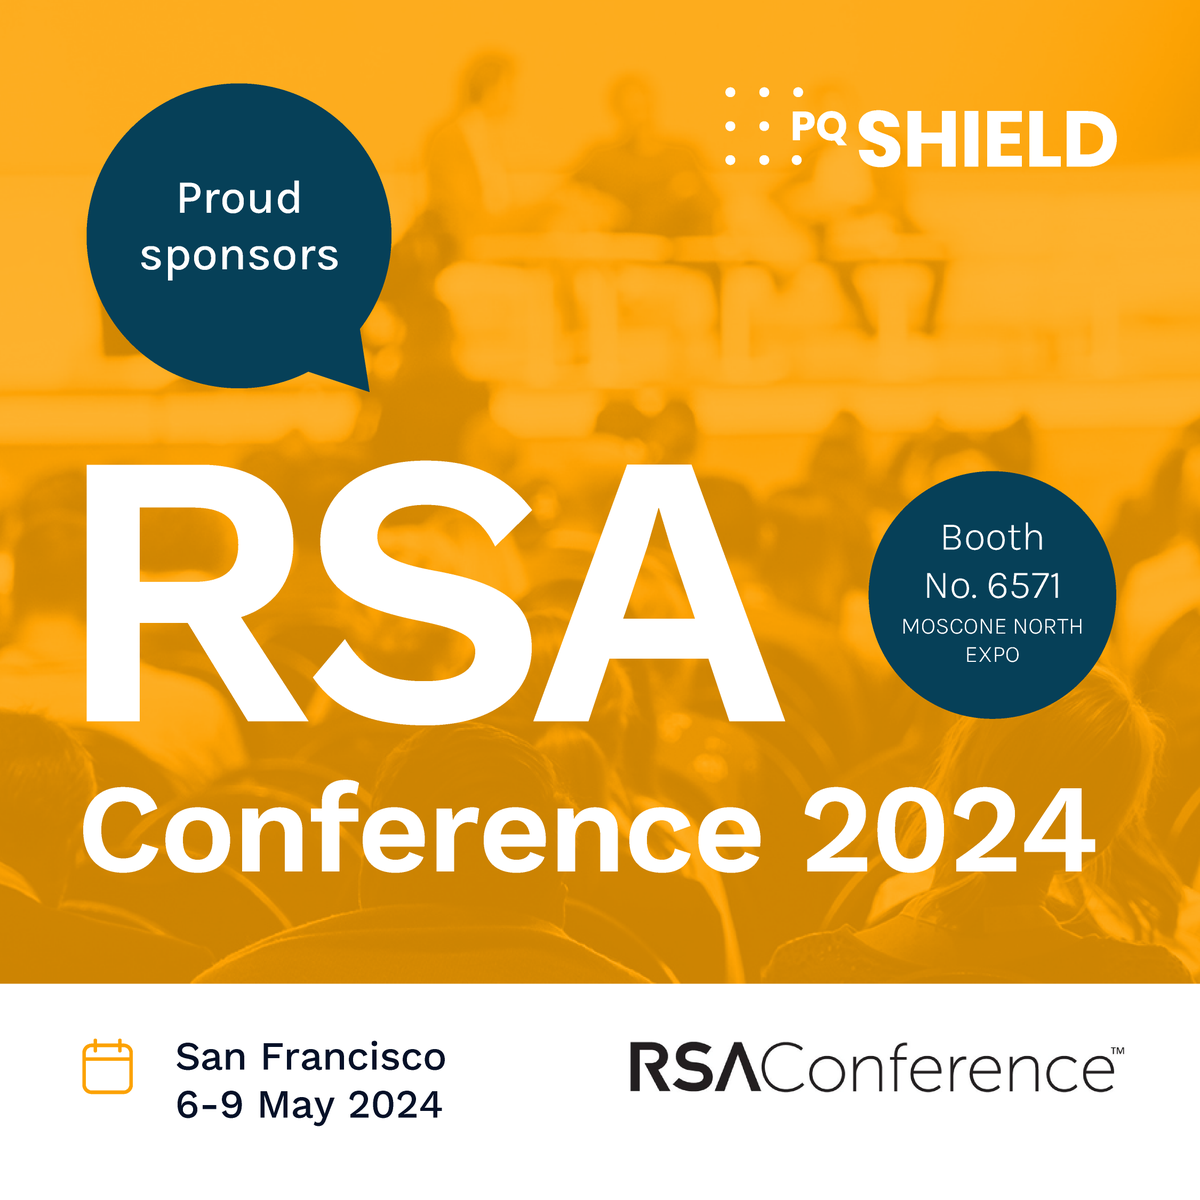 We are looking forward to attending @RSAConference 6-9 May where you will find us in the MOSCONE NORTH EXPO, stand no. 6571. We will be running @AMD and @latticesemi demos on our stand so we do hope you will come along and say hello. #cryptography #cybersecurity #RSA